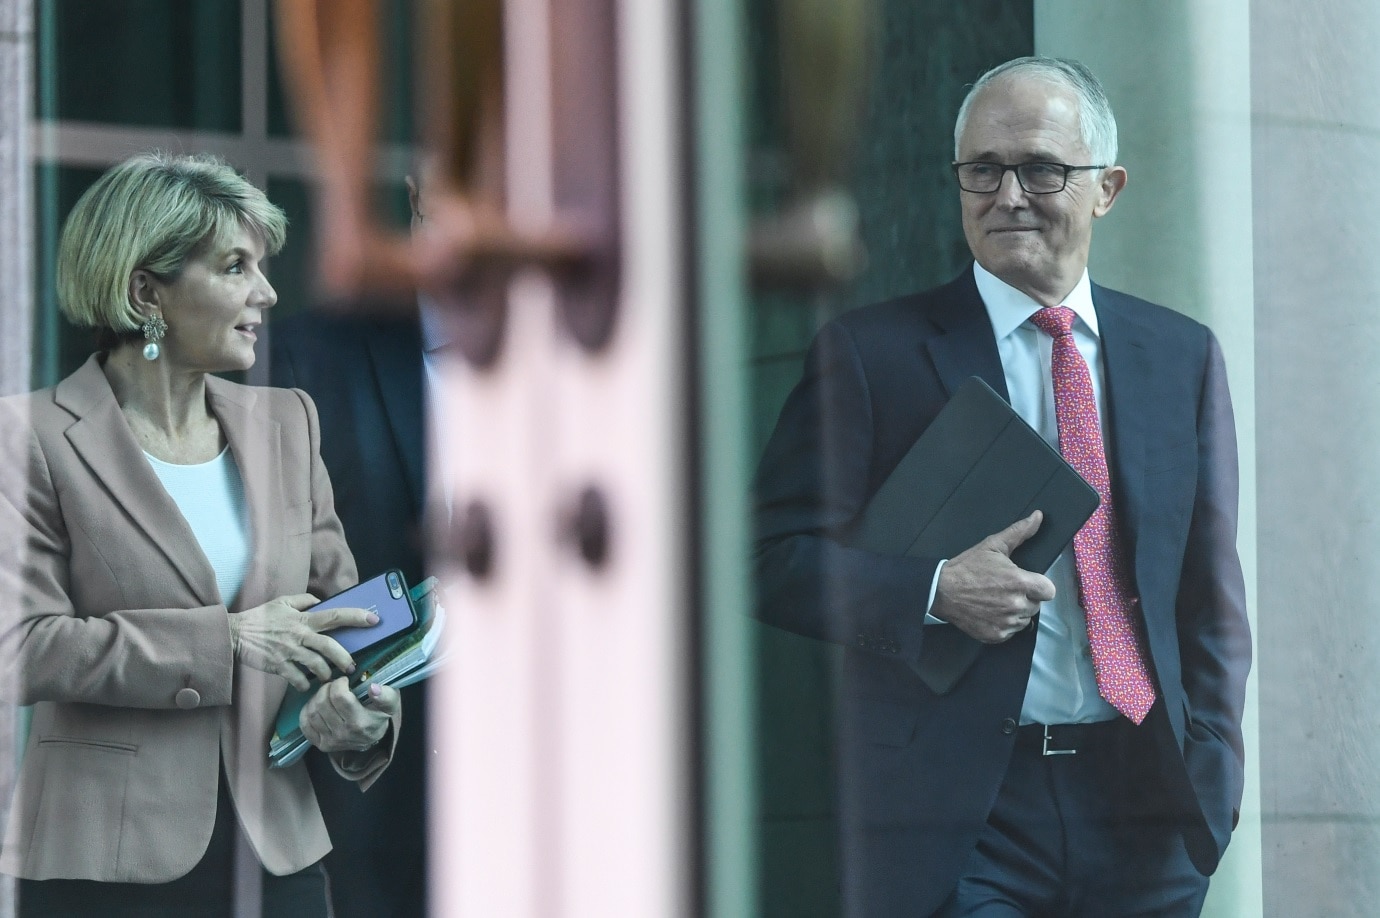 Australian Prime Minister Malcolm Turnbull (right) and Australian Foreign Minister Julie Bishop arrive for a party room meeting